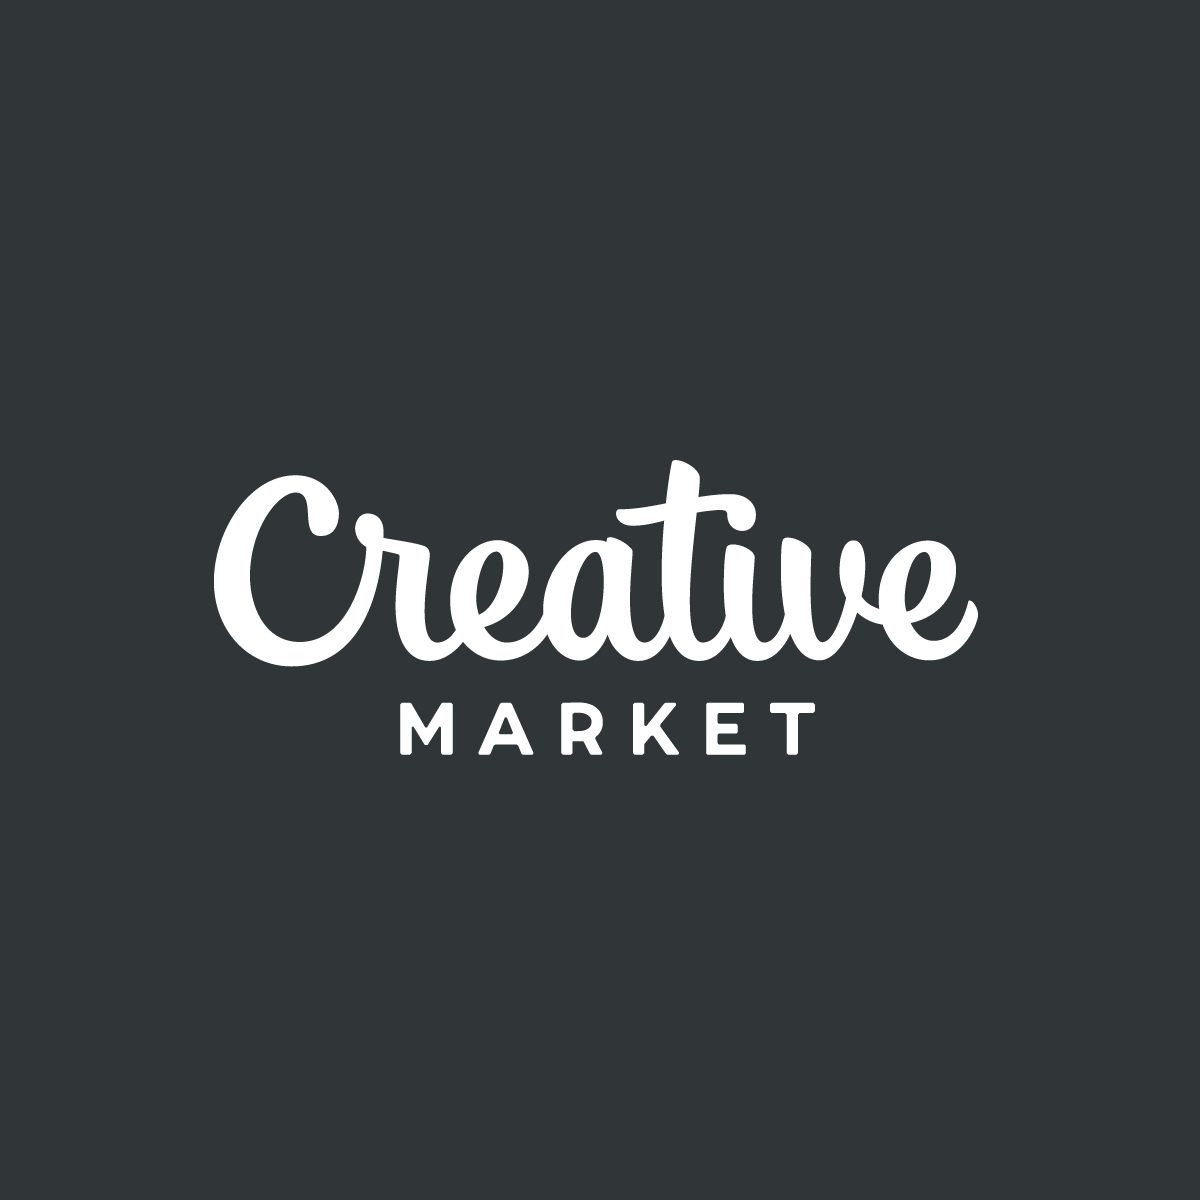 Download Free Fonts Graphics Themes And More Creative Market Fonts Typography